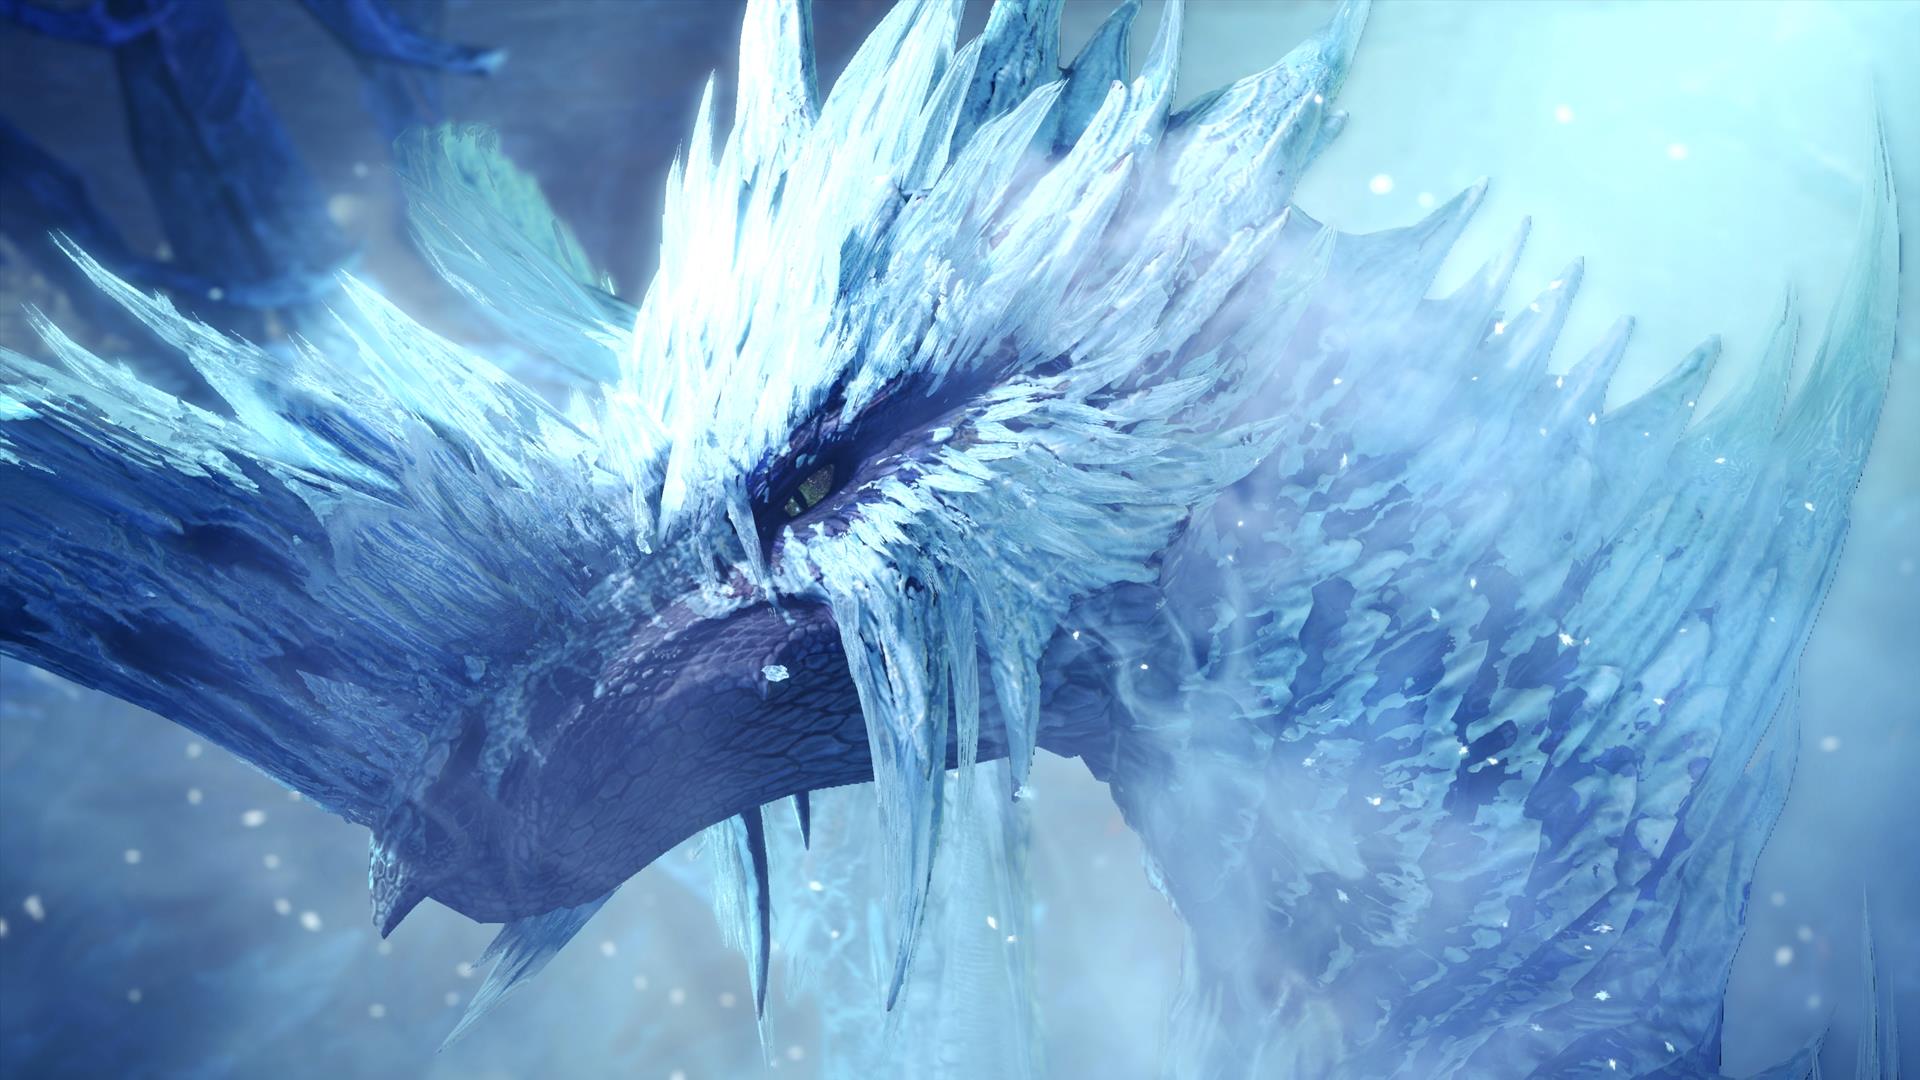 Image for Monster Hunter World: Iceborne performance issues on PC being looked into